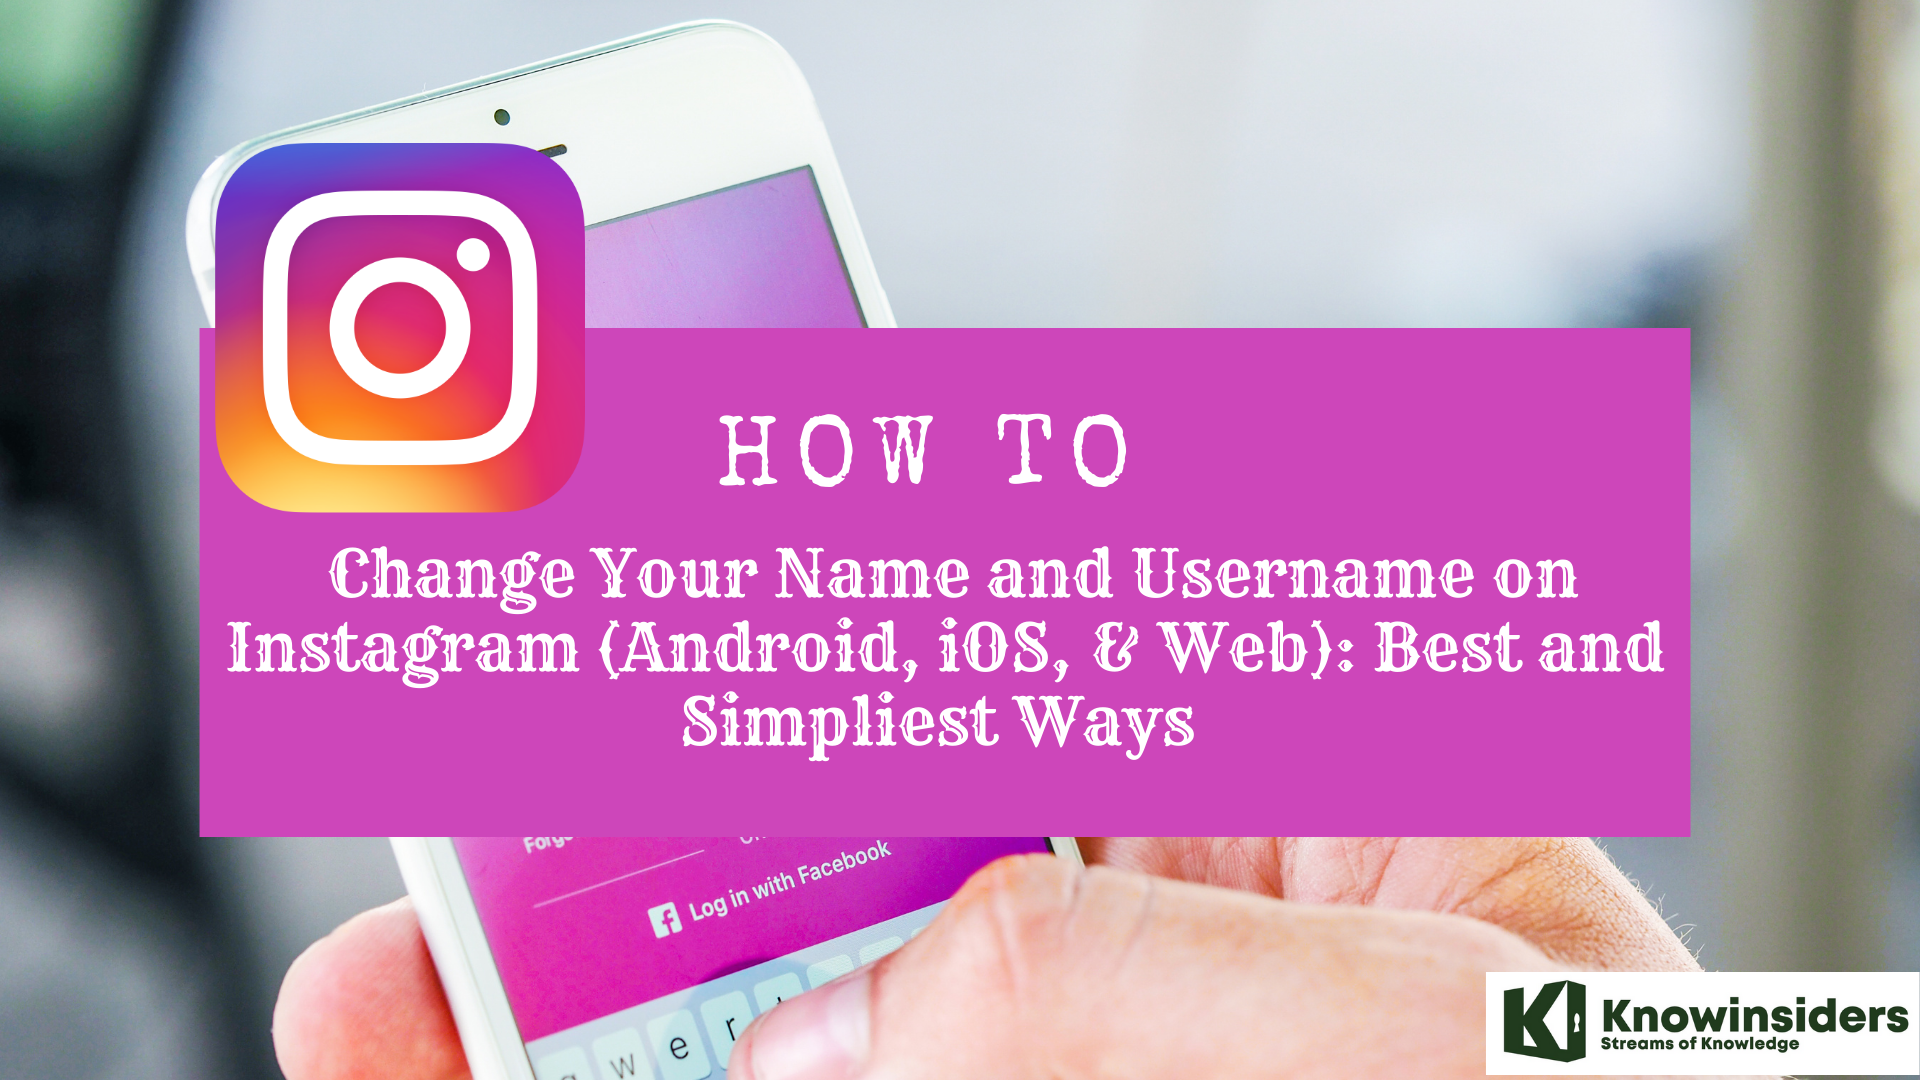 The Simpliest Ways to Change Your Name and Username on Instagram with Android, iOS, & Web